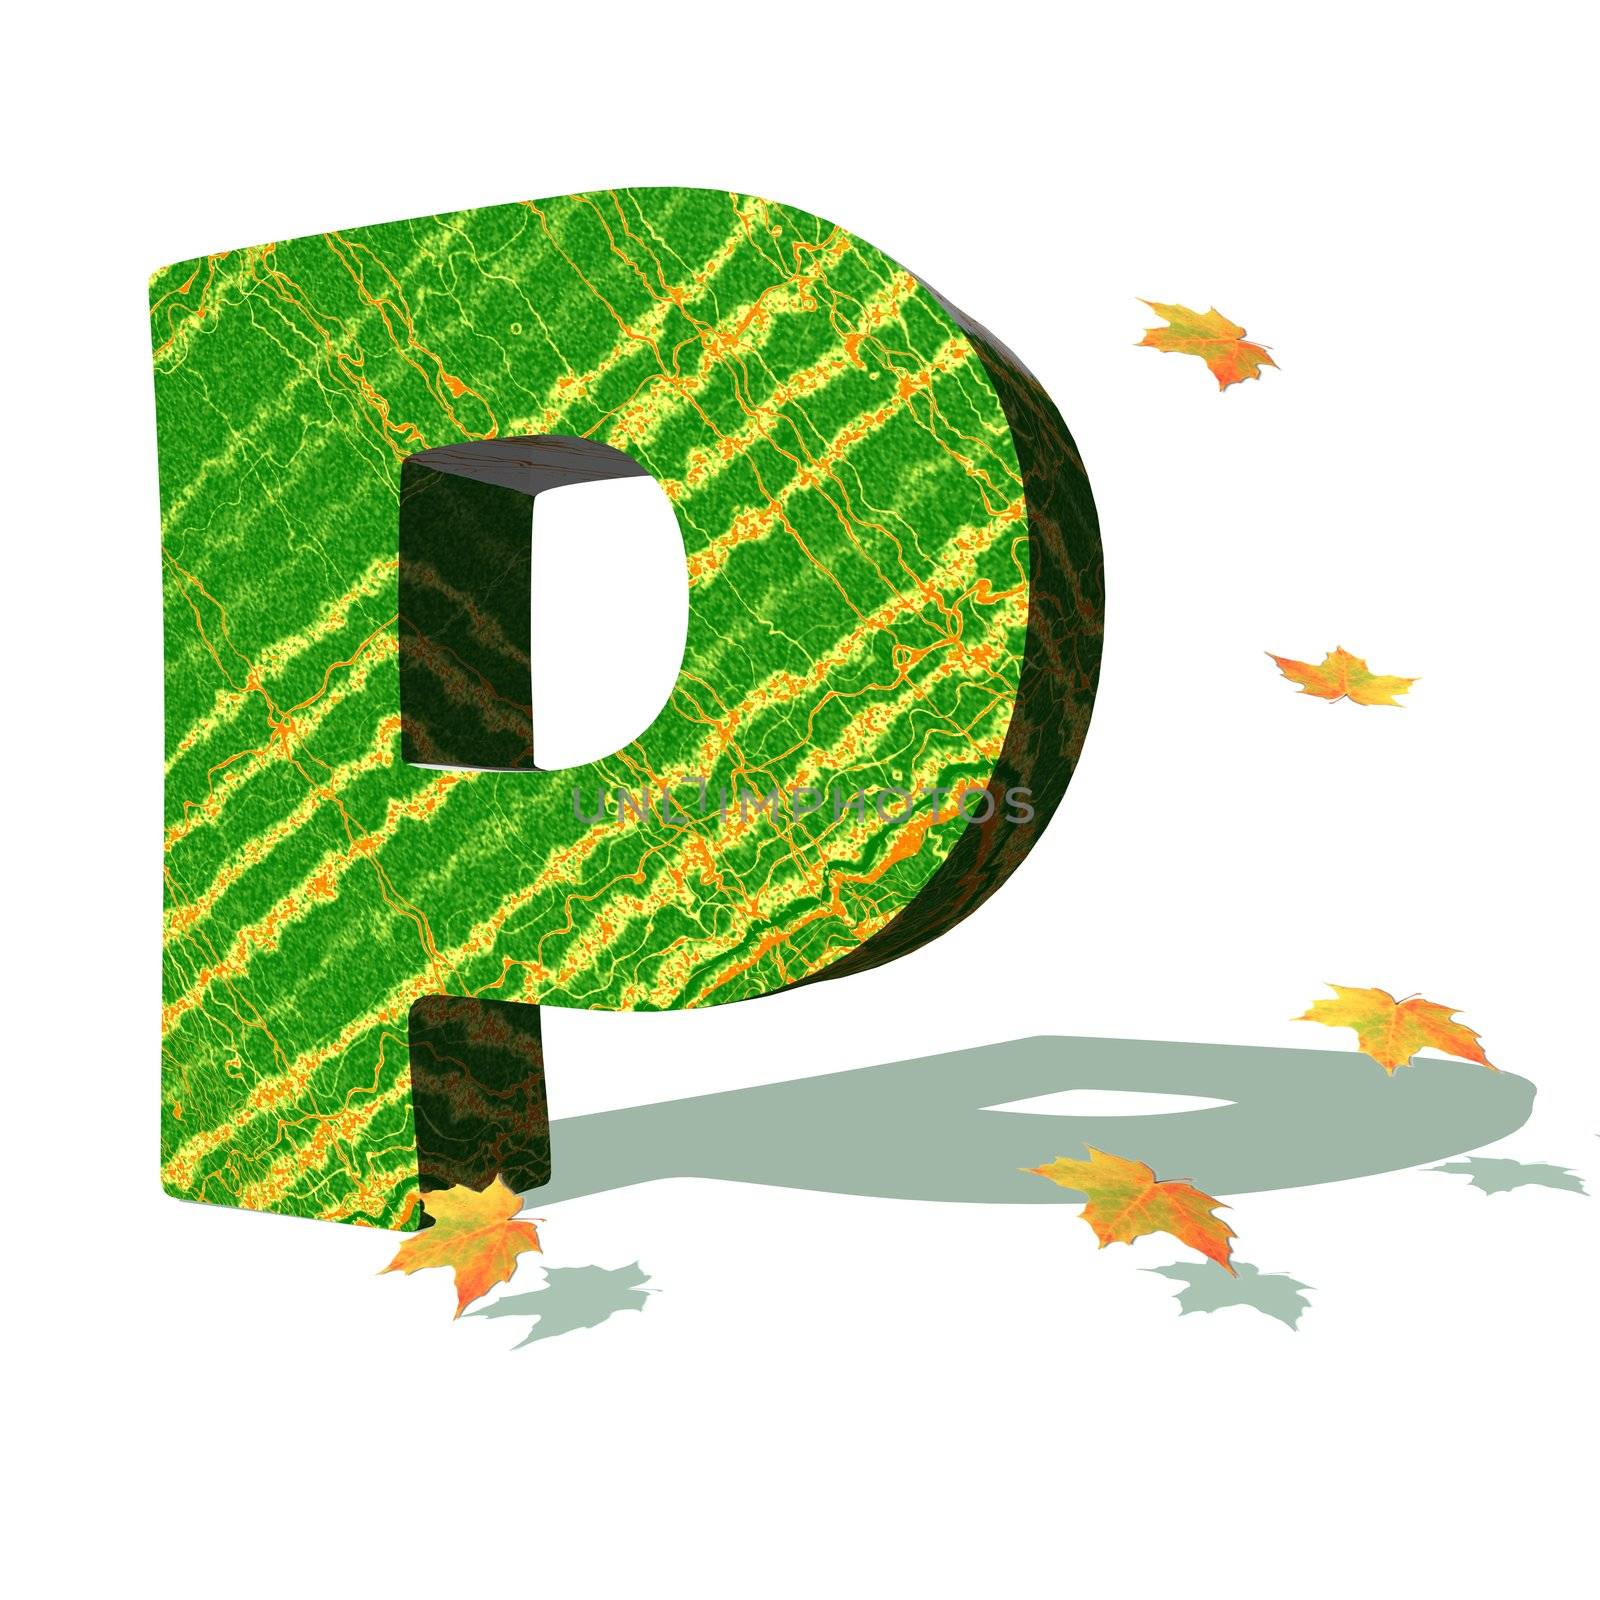 Green ecological P capital letter surrounded by few autumn falling leaves in a white background with shadows